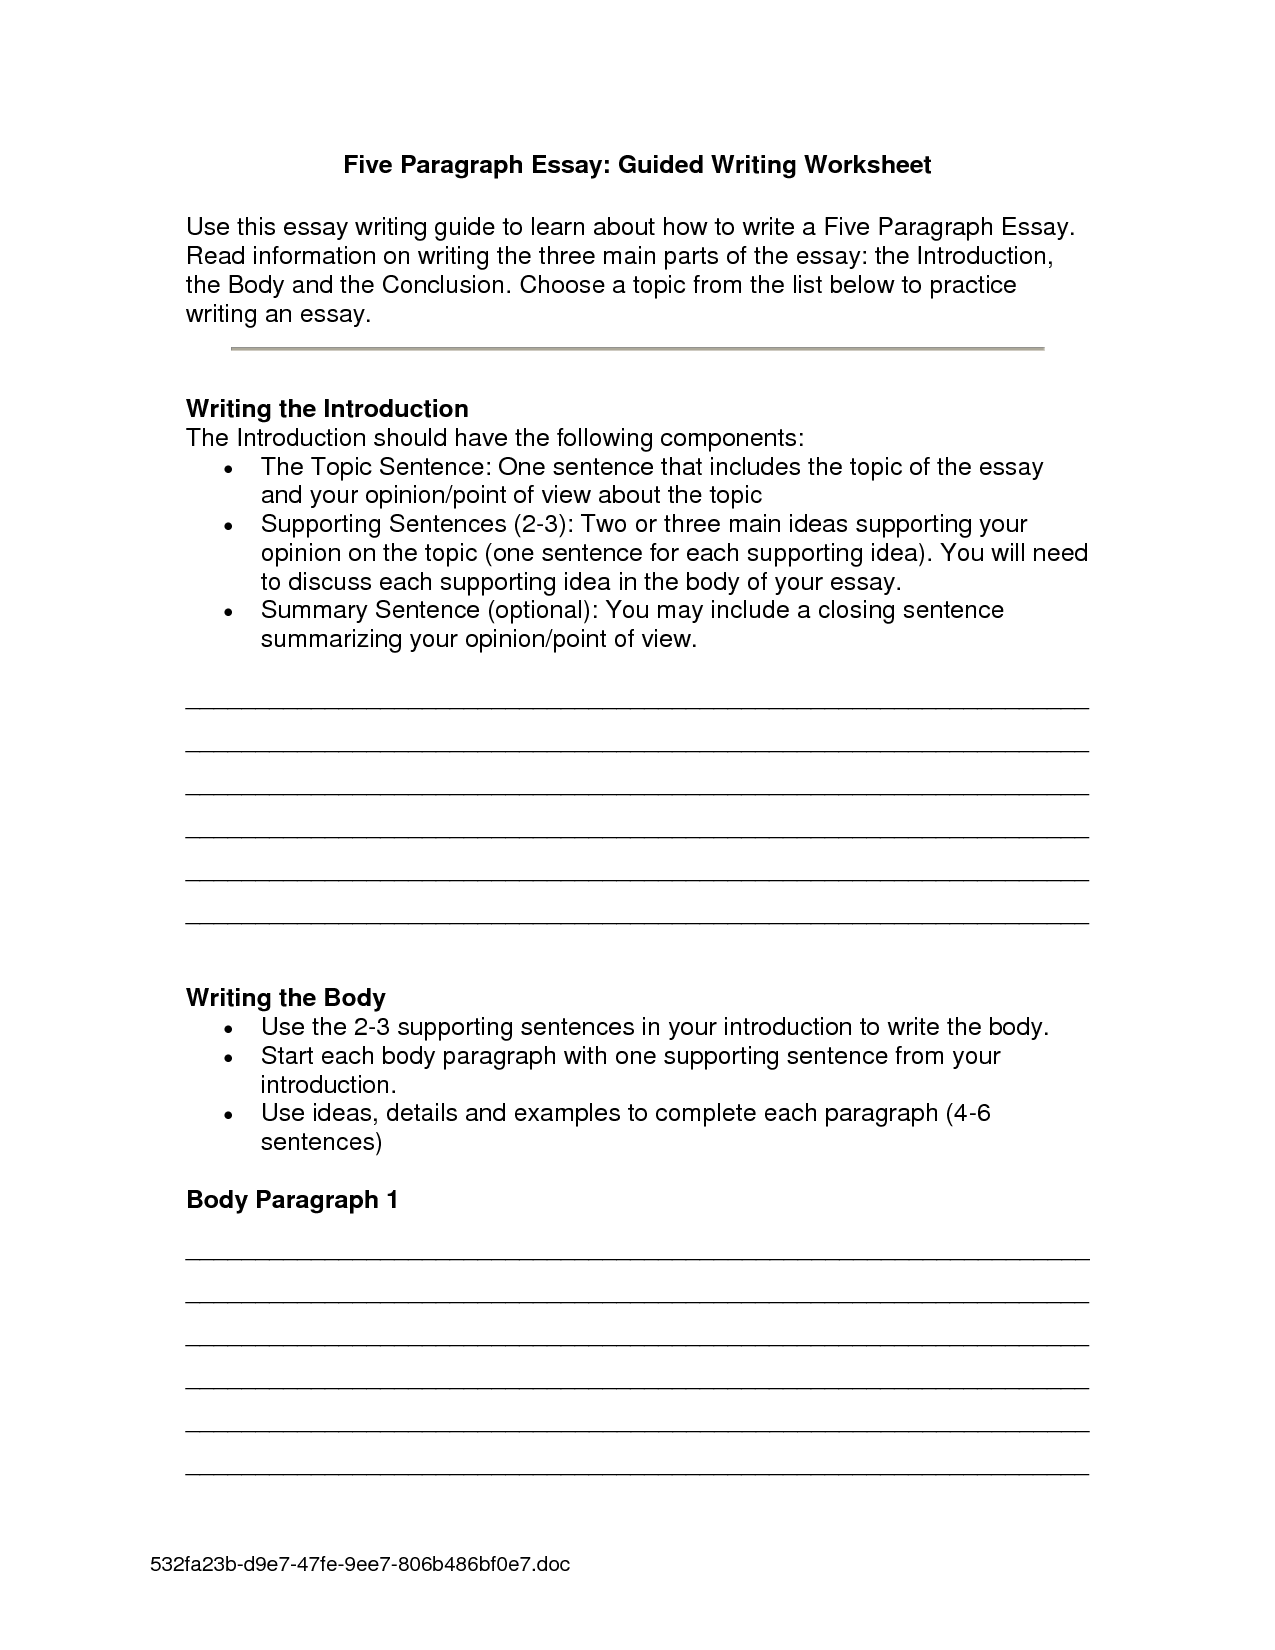 How to write a thesis paragraph for an essay